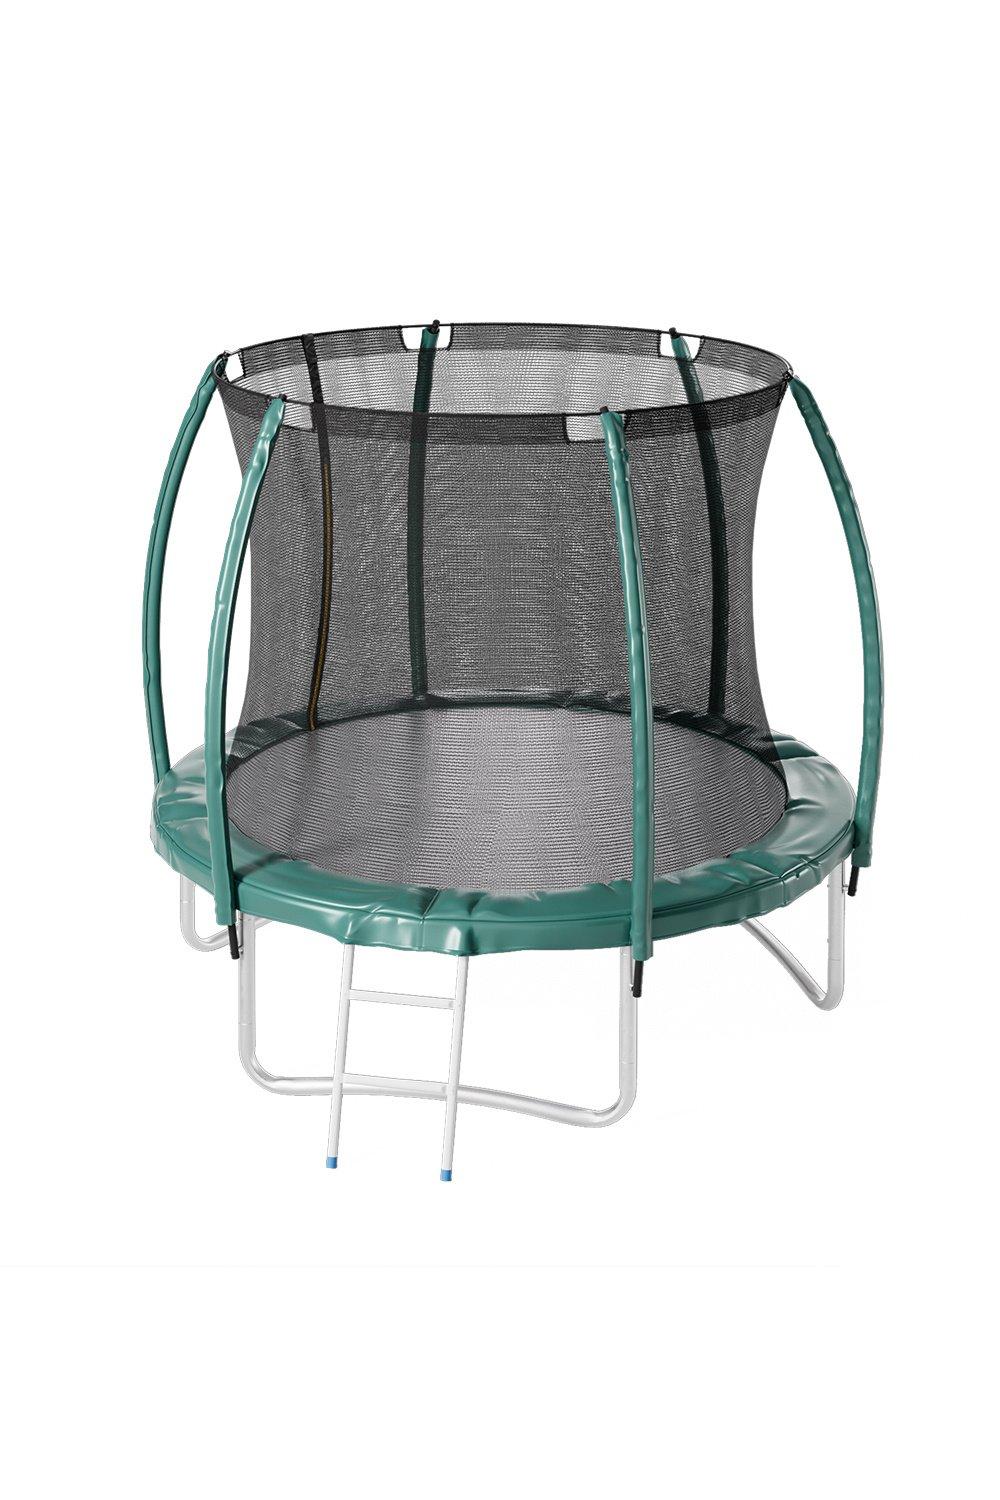 10FT Outdoor Enclosure Trampoline with Ladder